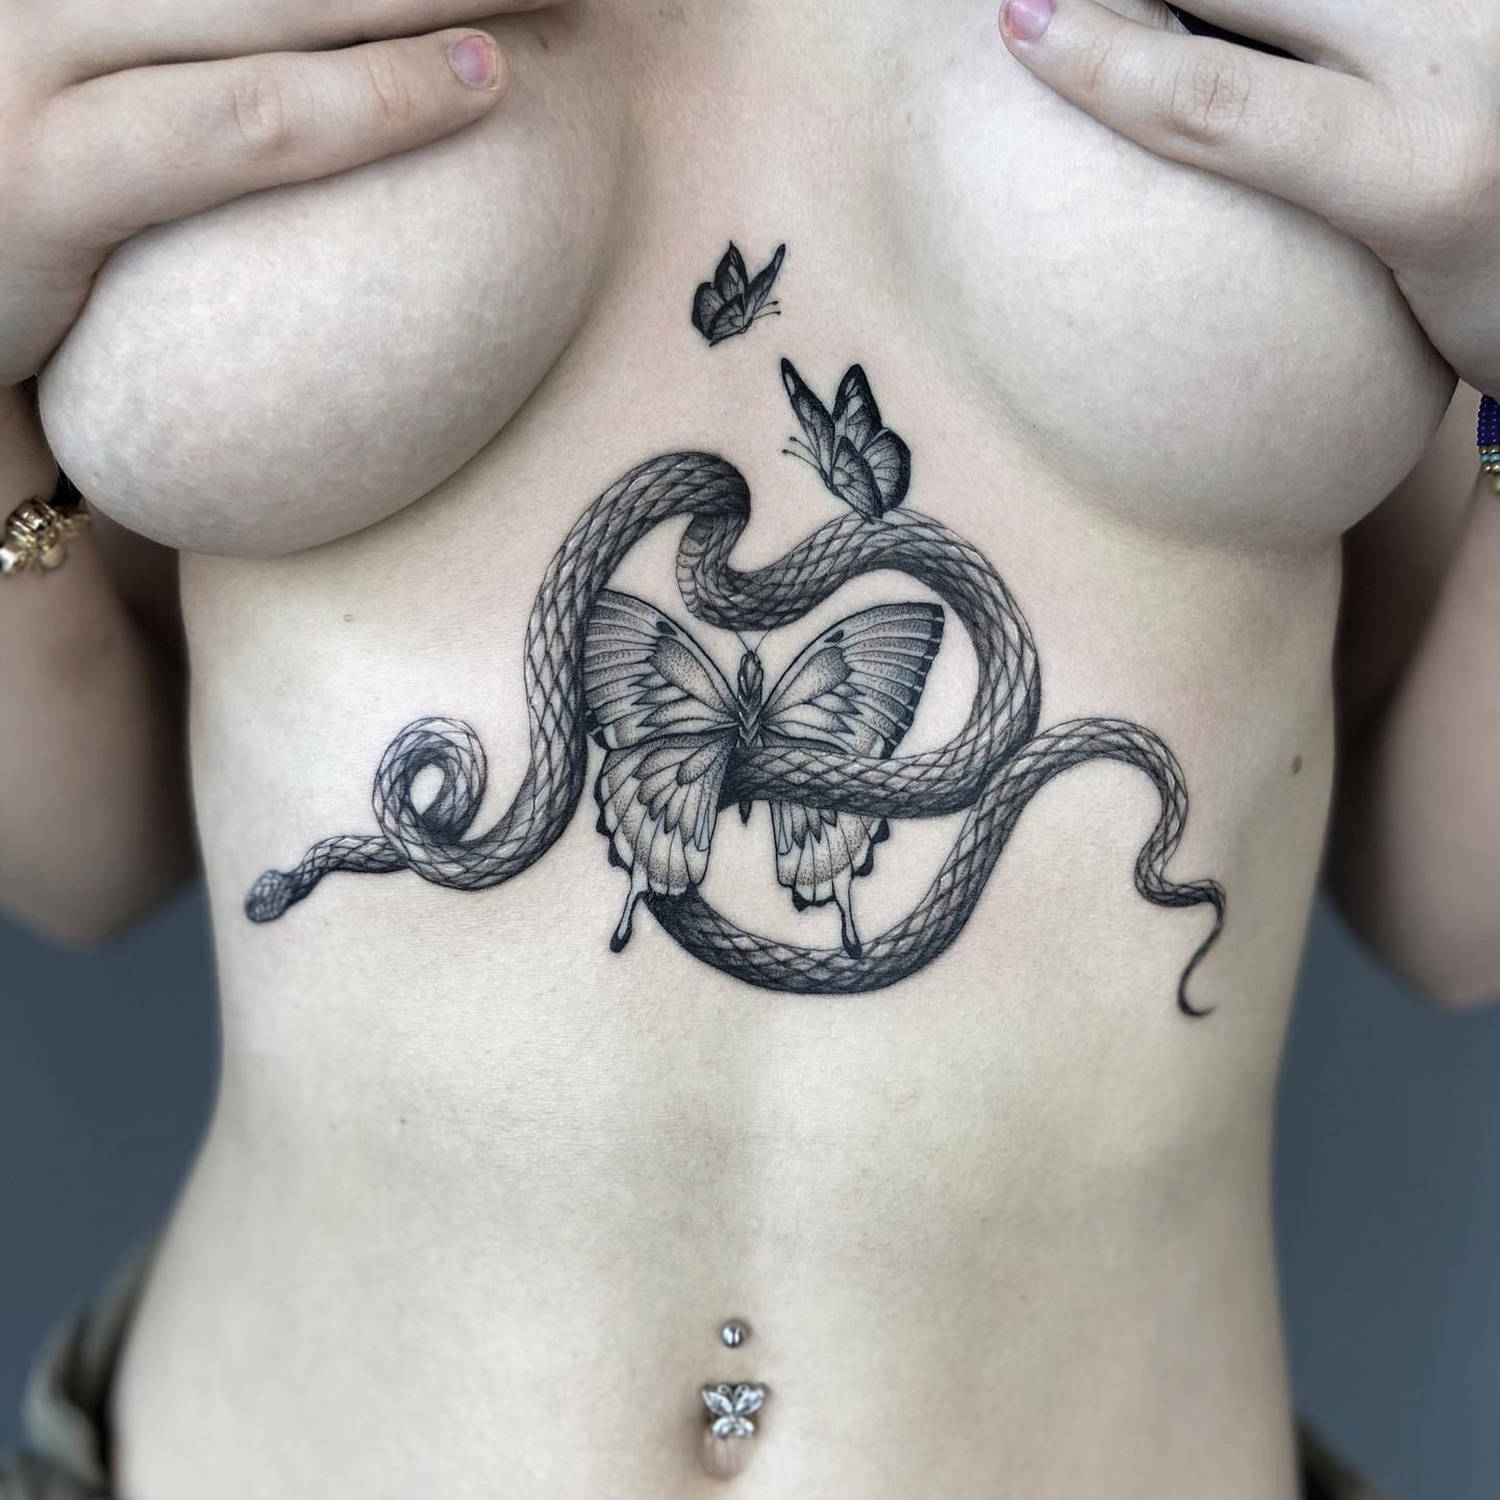 butterfly and snake, fine-line tattoos on torso by delphin musquet, sang bleu london